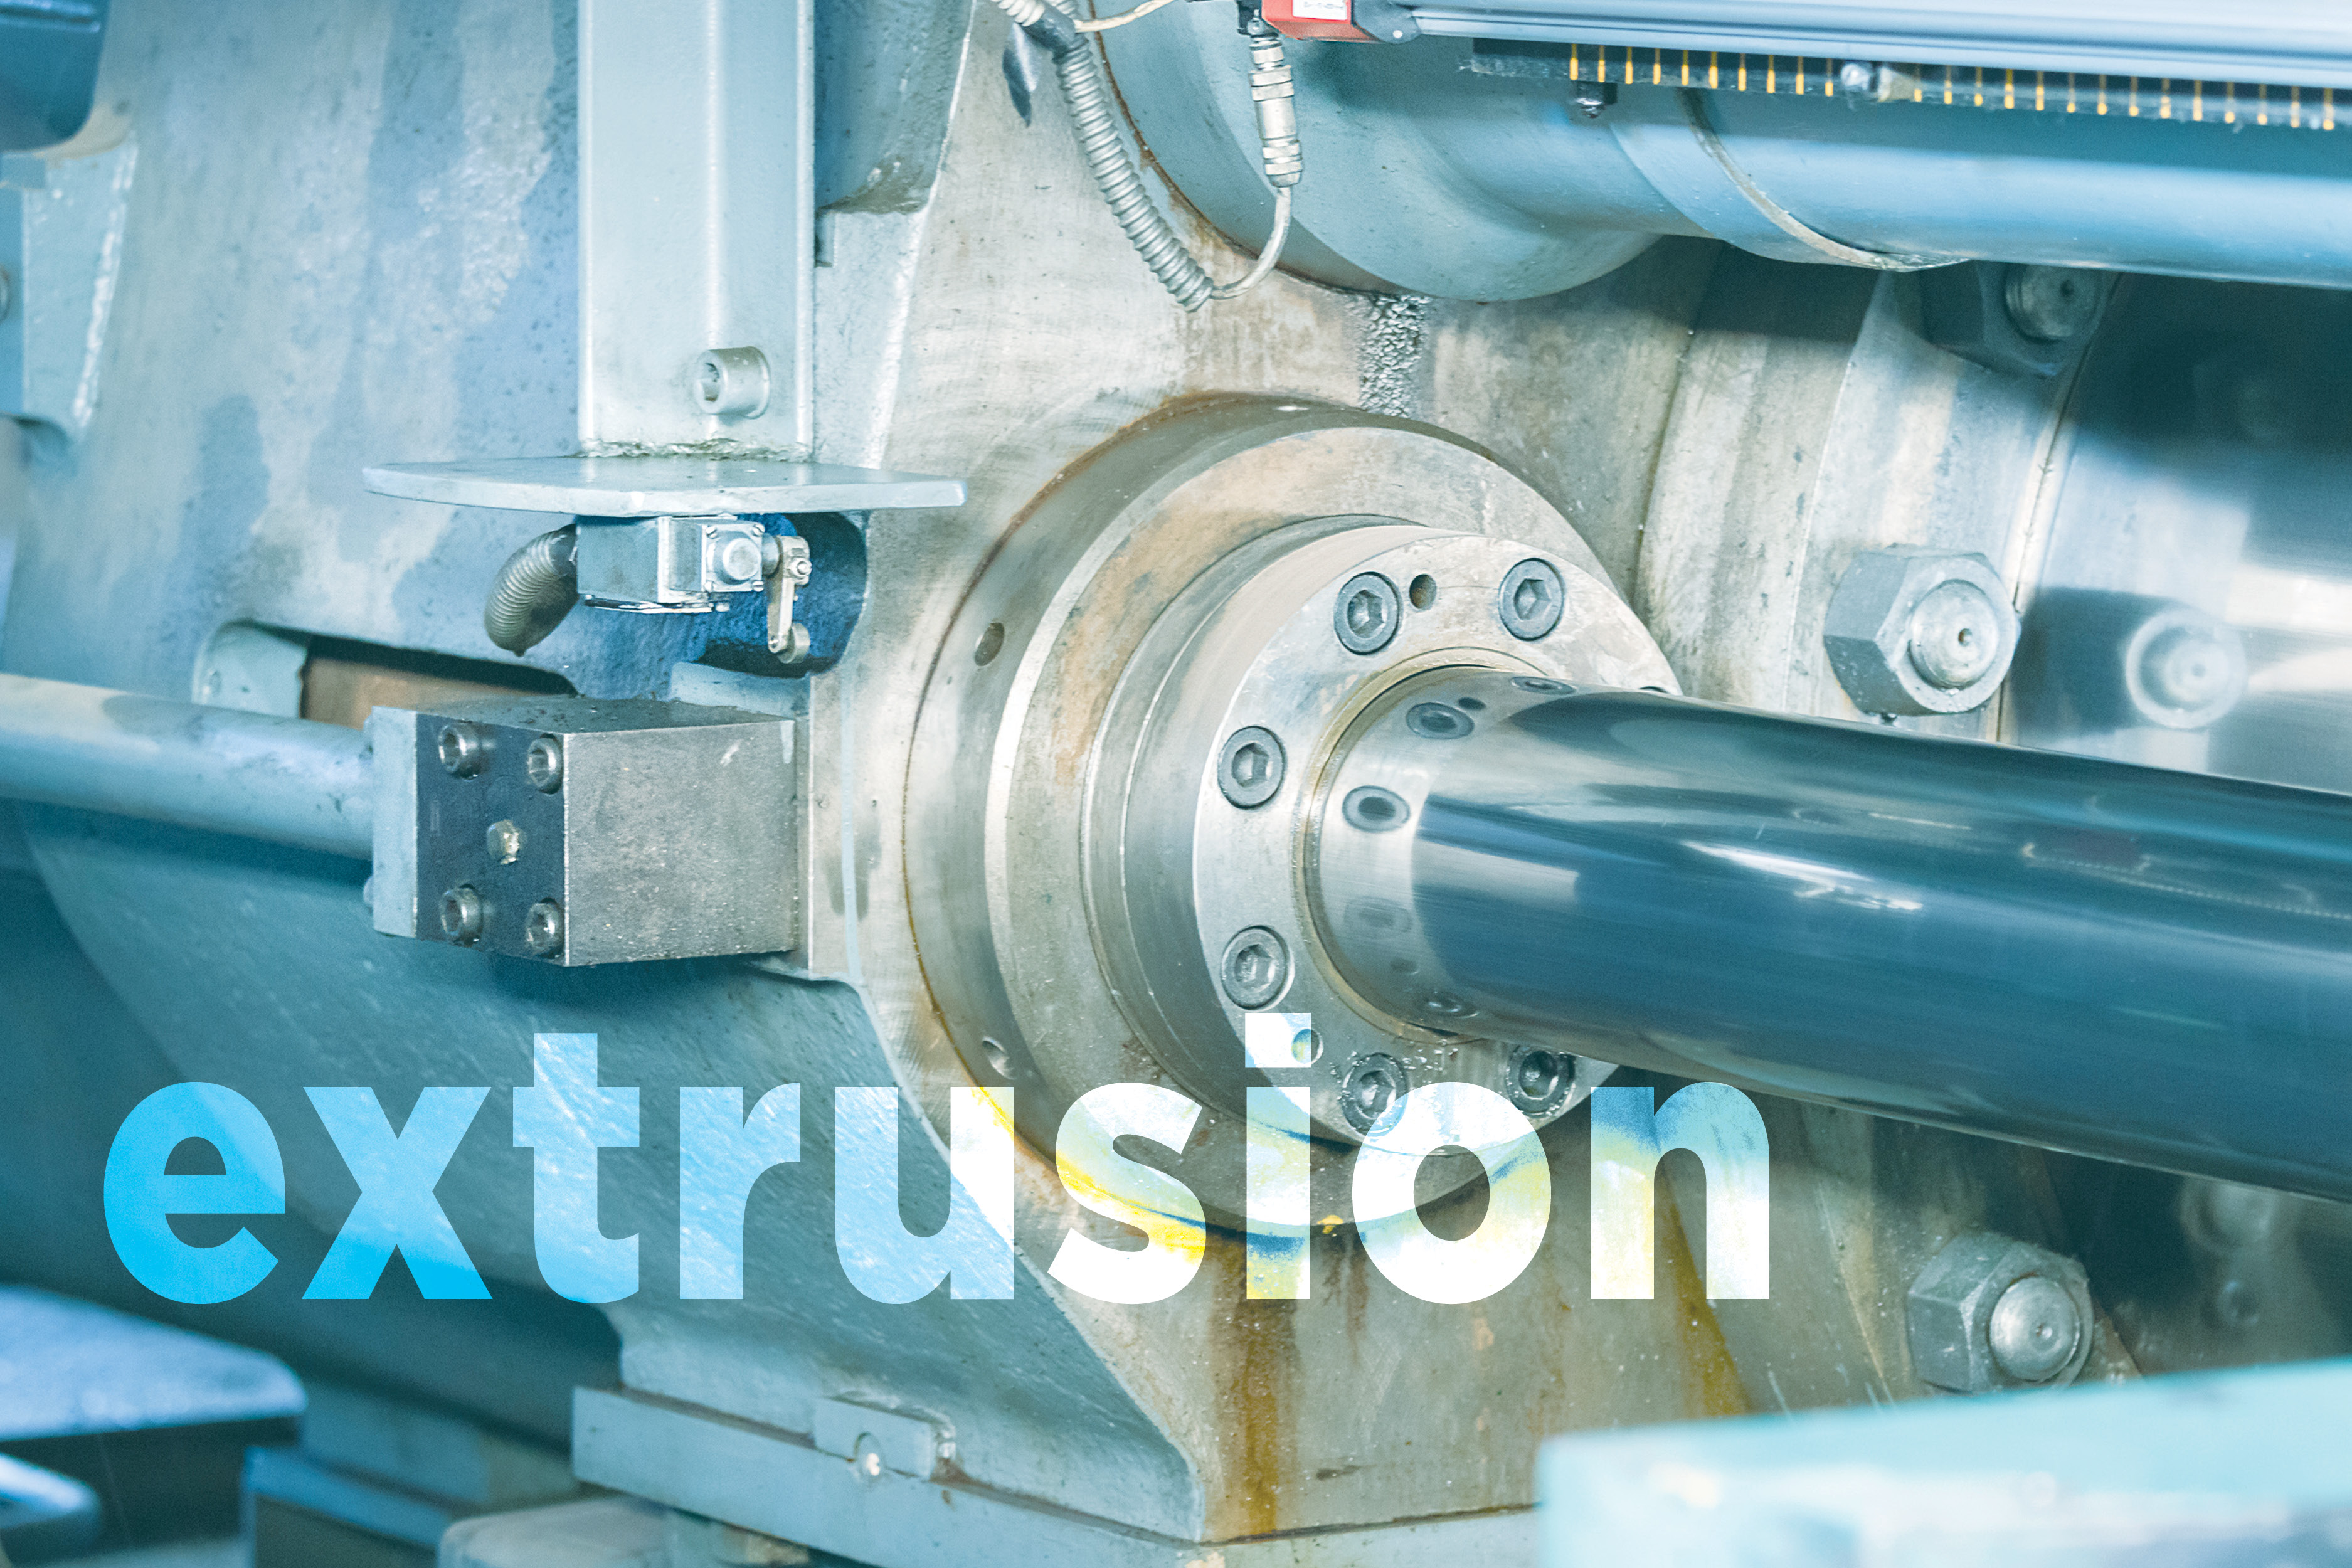 Extrusion | Bixby International | Image of extrusion equipment